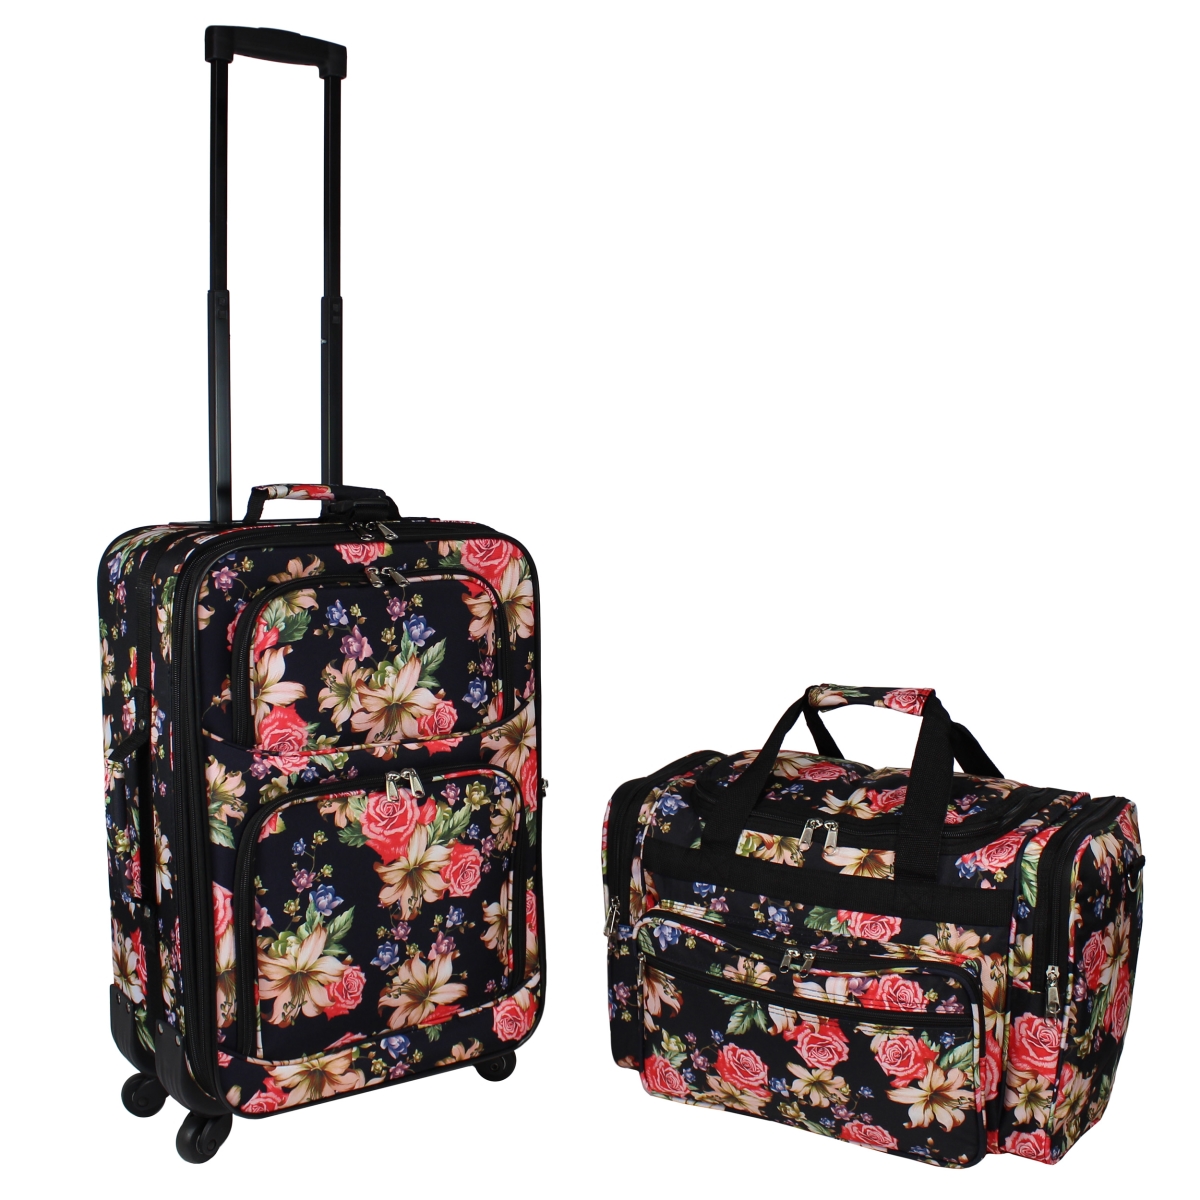 Wt8701-2-203 Carry On Expandable Spinner Luggage Set - Rose Lily, 2 Piece